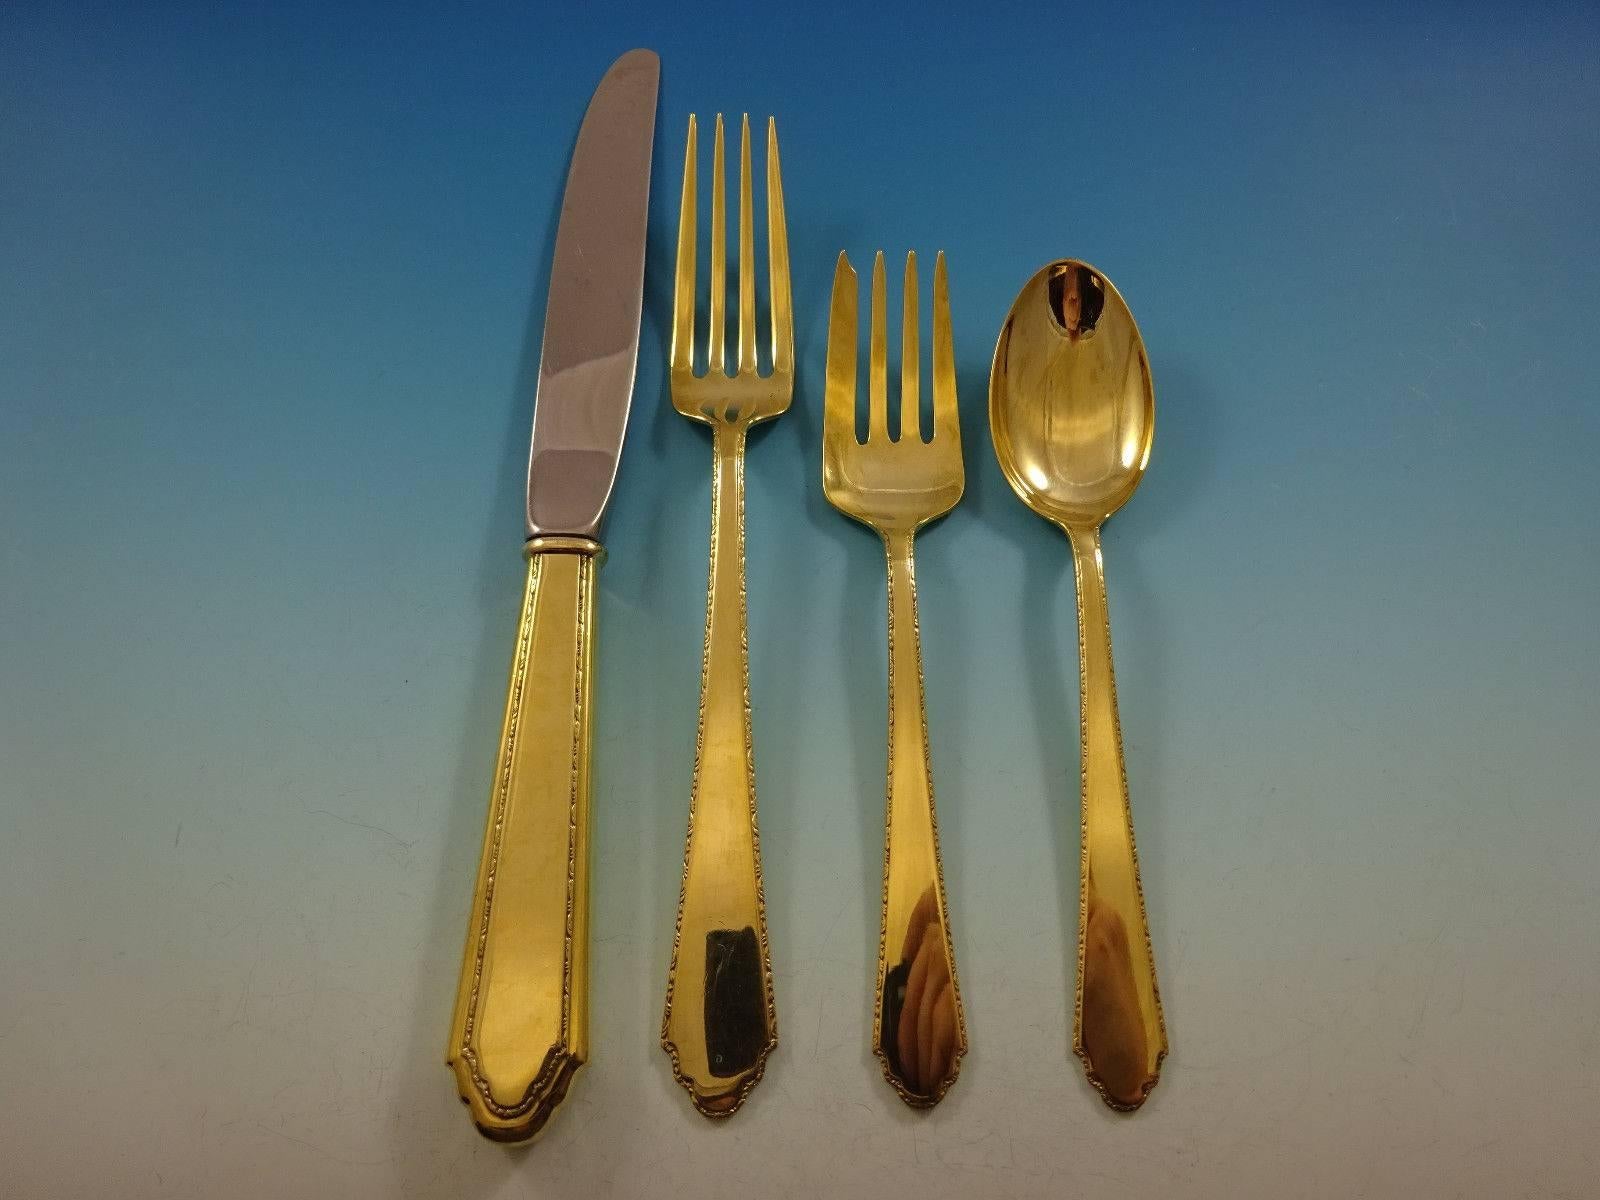 Gorgeous William and Mary Gold by Lunt Sterling Silver flatware set, 48 pieces. Gold flatware is on trend and makes a bold statement on your table. 

This set is vermeil (completely gold-washed) and includes:

12 knives, 8 5/8